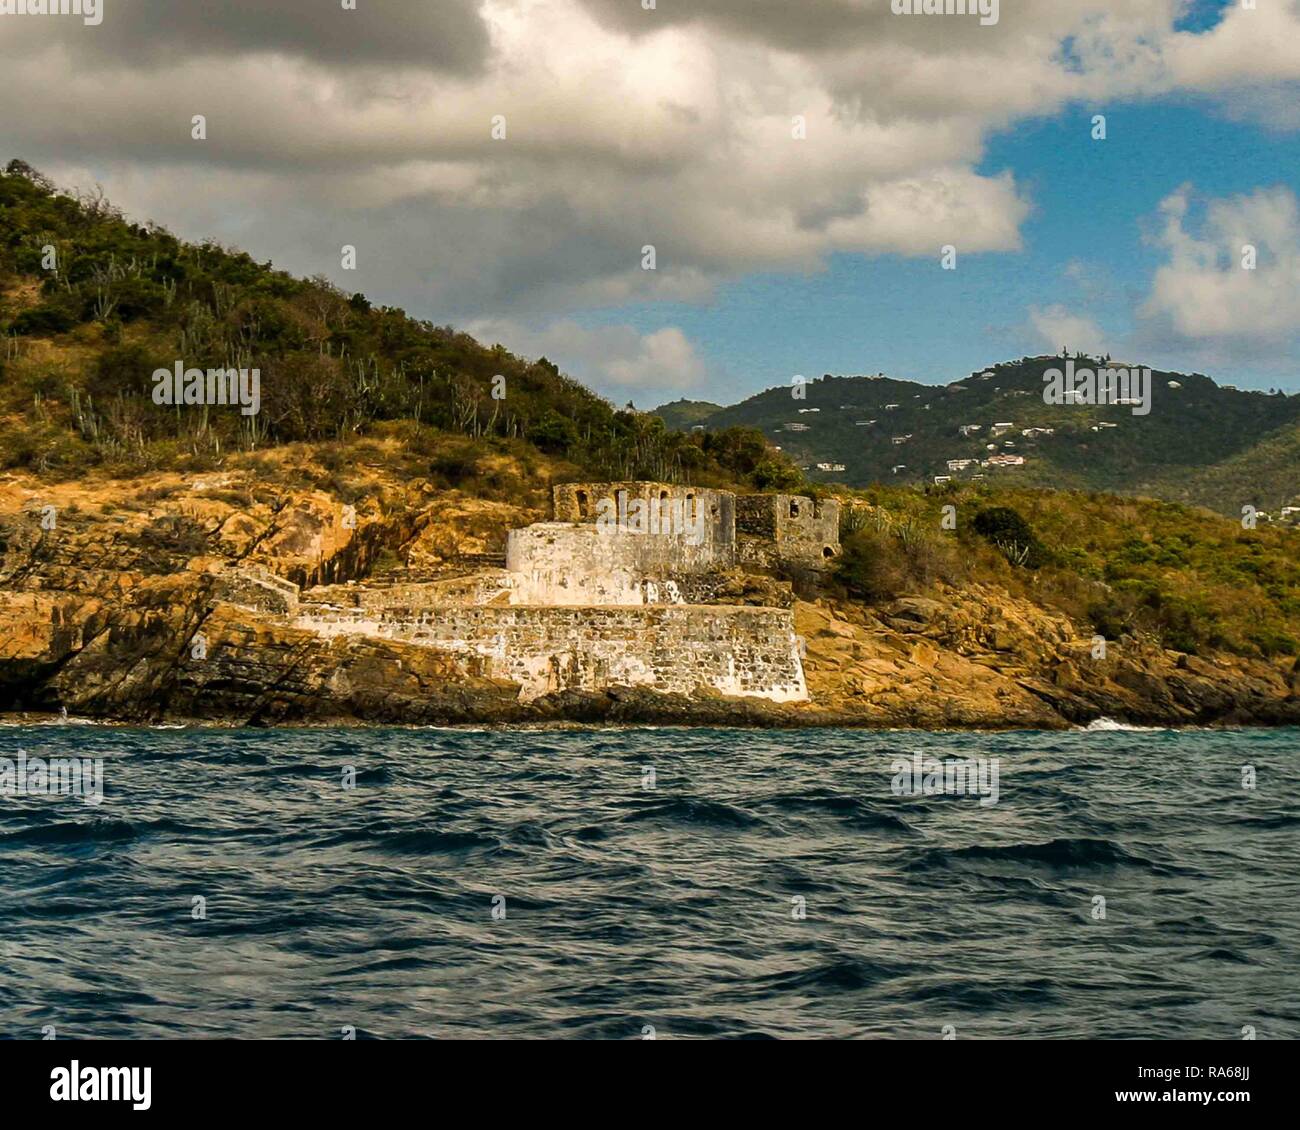 St Thomas, U.S. Virgin Islands, USA. 29th Mar, 2005. Ruins of Fort Willoughby, the old British Fort on historic Hassel Island, just outside Charlotte Amalie harbor, part of the Virgin Islands National Park. Credit: Arnold Drapkin/ZUMA Wire/Alamy Live News Stock Photo